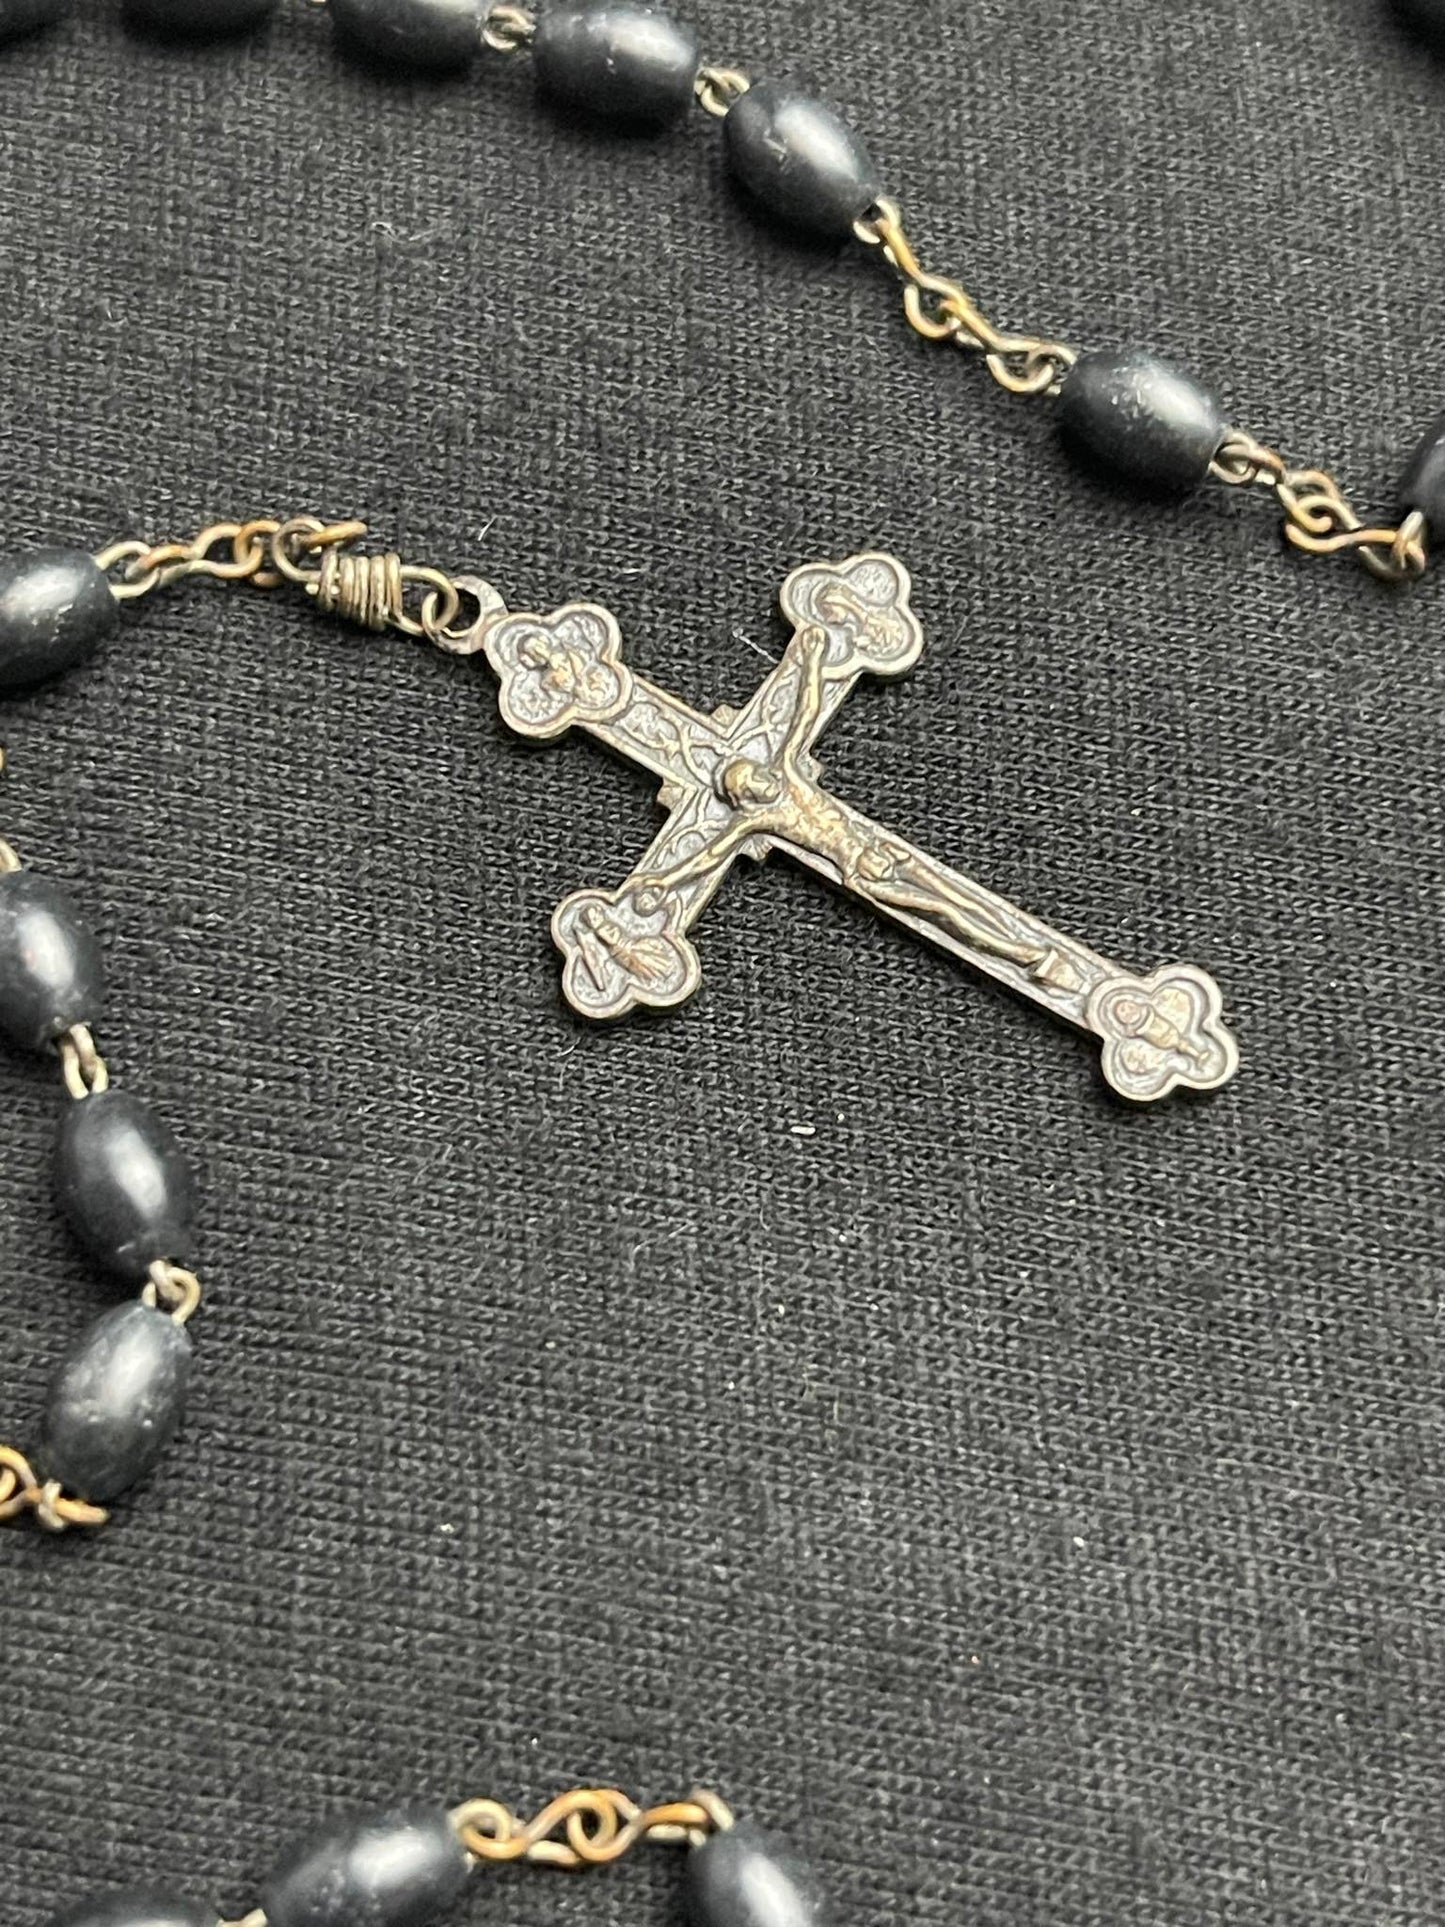 WW2 GERMAN SOLDIER'S ROSARY